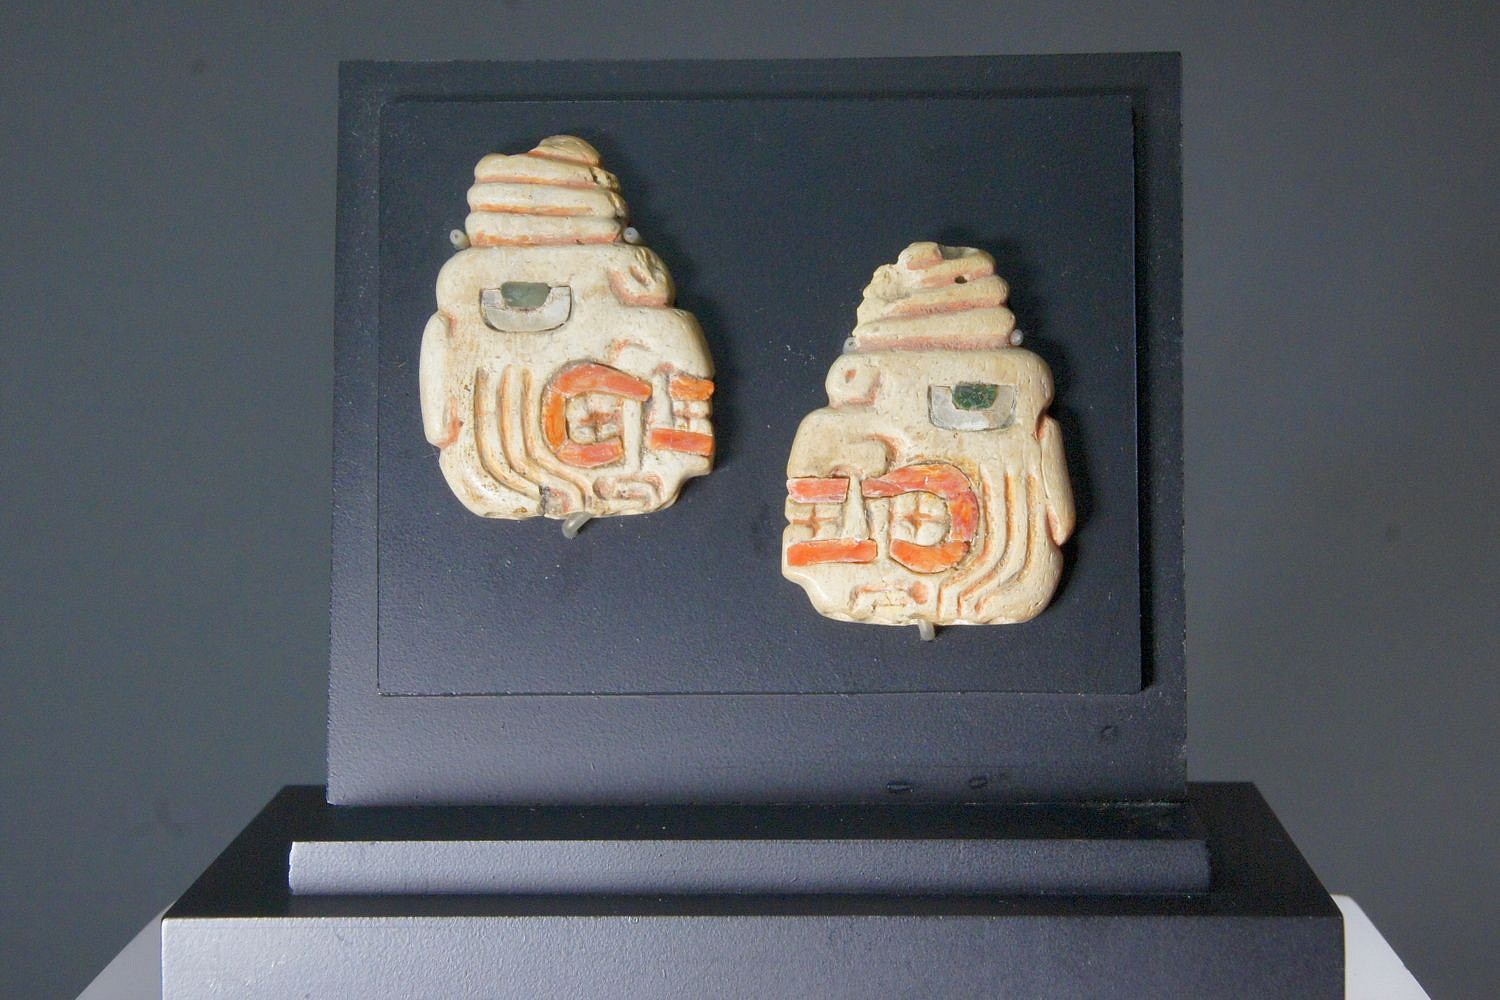 Peru, Pair of Chavi­n Shell Ear Pendants with Fanged Deity Heads Wearing Turbans
This pair of ear pendants inlaid eyes with shell and turquoise pupils. The teeth are also inlaid with shell.  Both profiles wear knotted turbans. The faces are similar to the large stone tenoned heads found at Chavín de Huantar.  A similar pair can be found in the "Handbook of South American Indians," Volume II, Julian H. Steward, ed. (1963: pl. 62).
Media: Shell
Dimensions: Height 1 3/4" x Width 1 1/2"
$7,500
97137